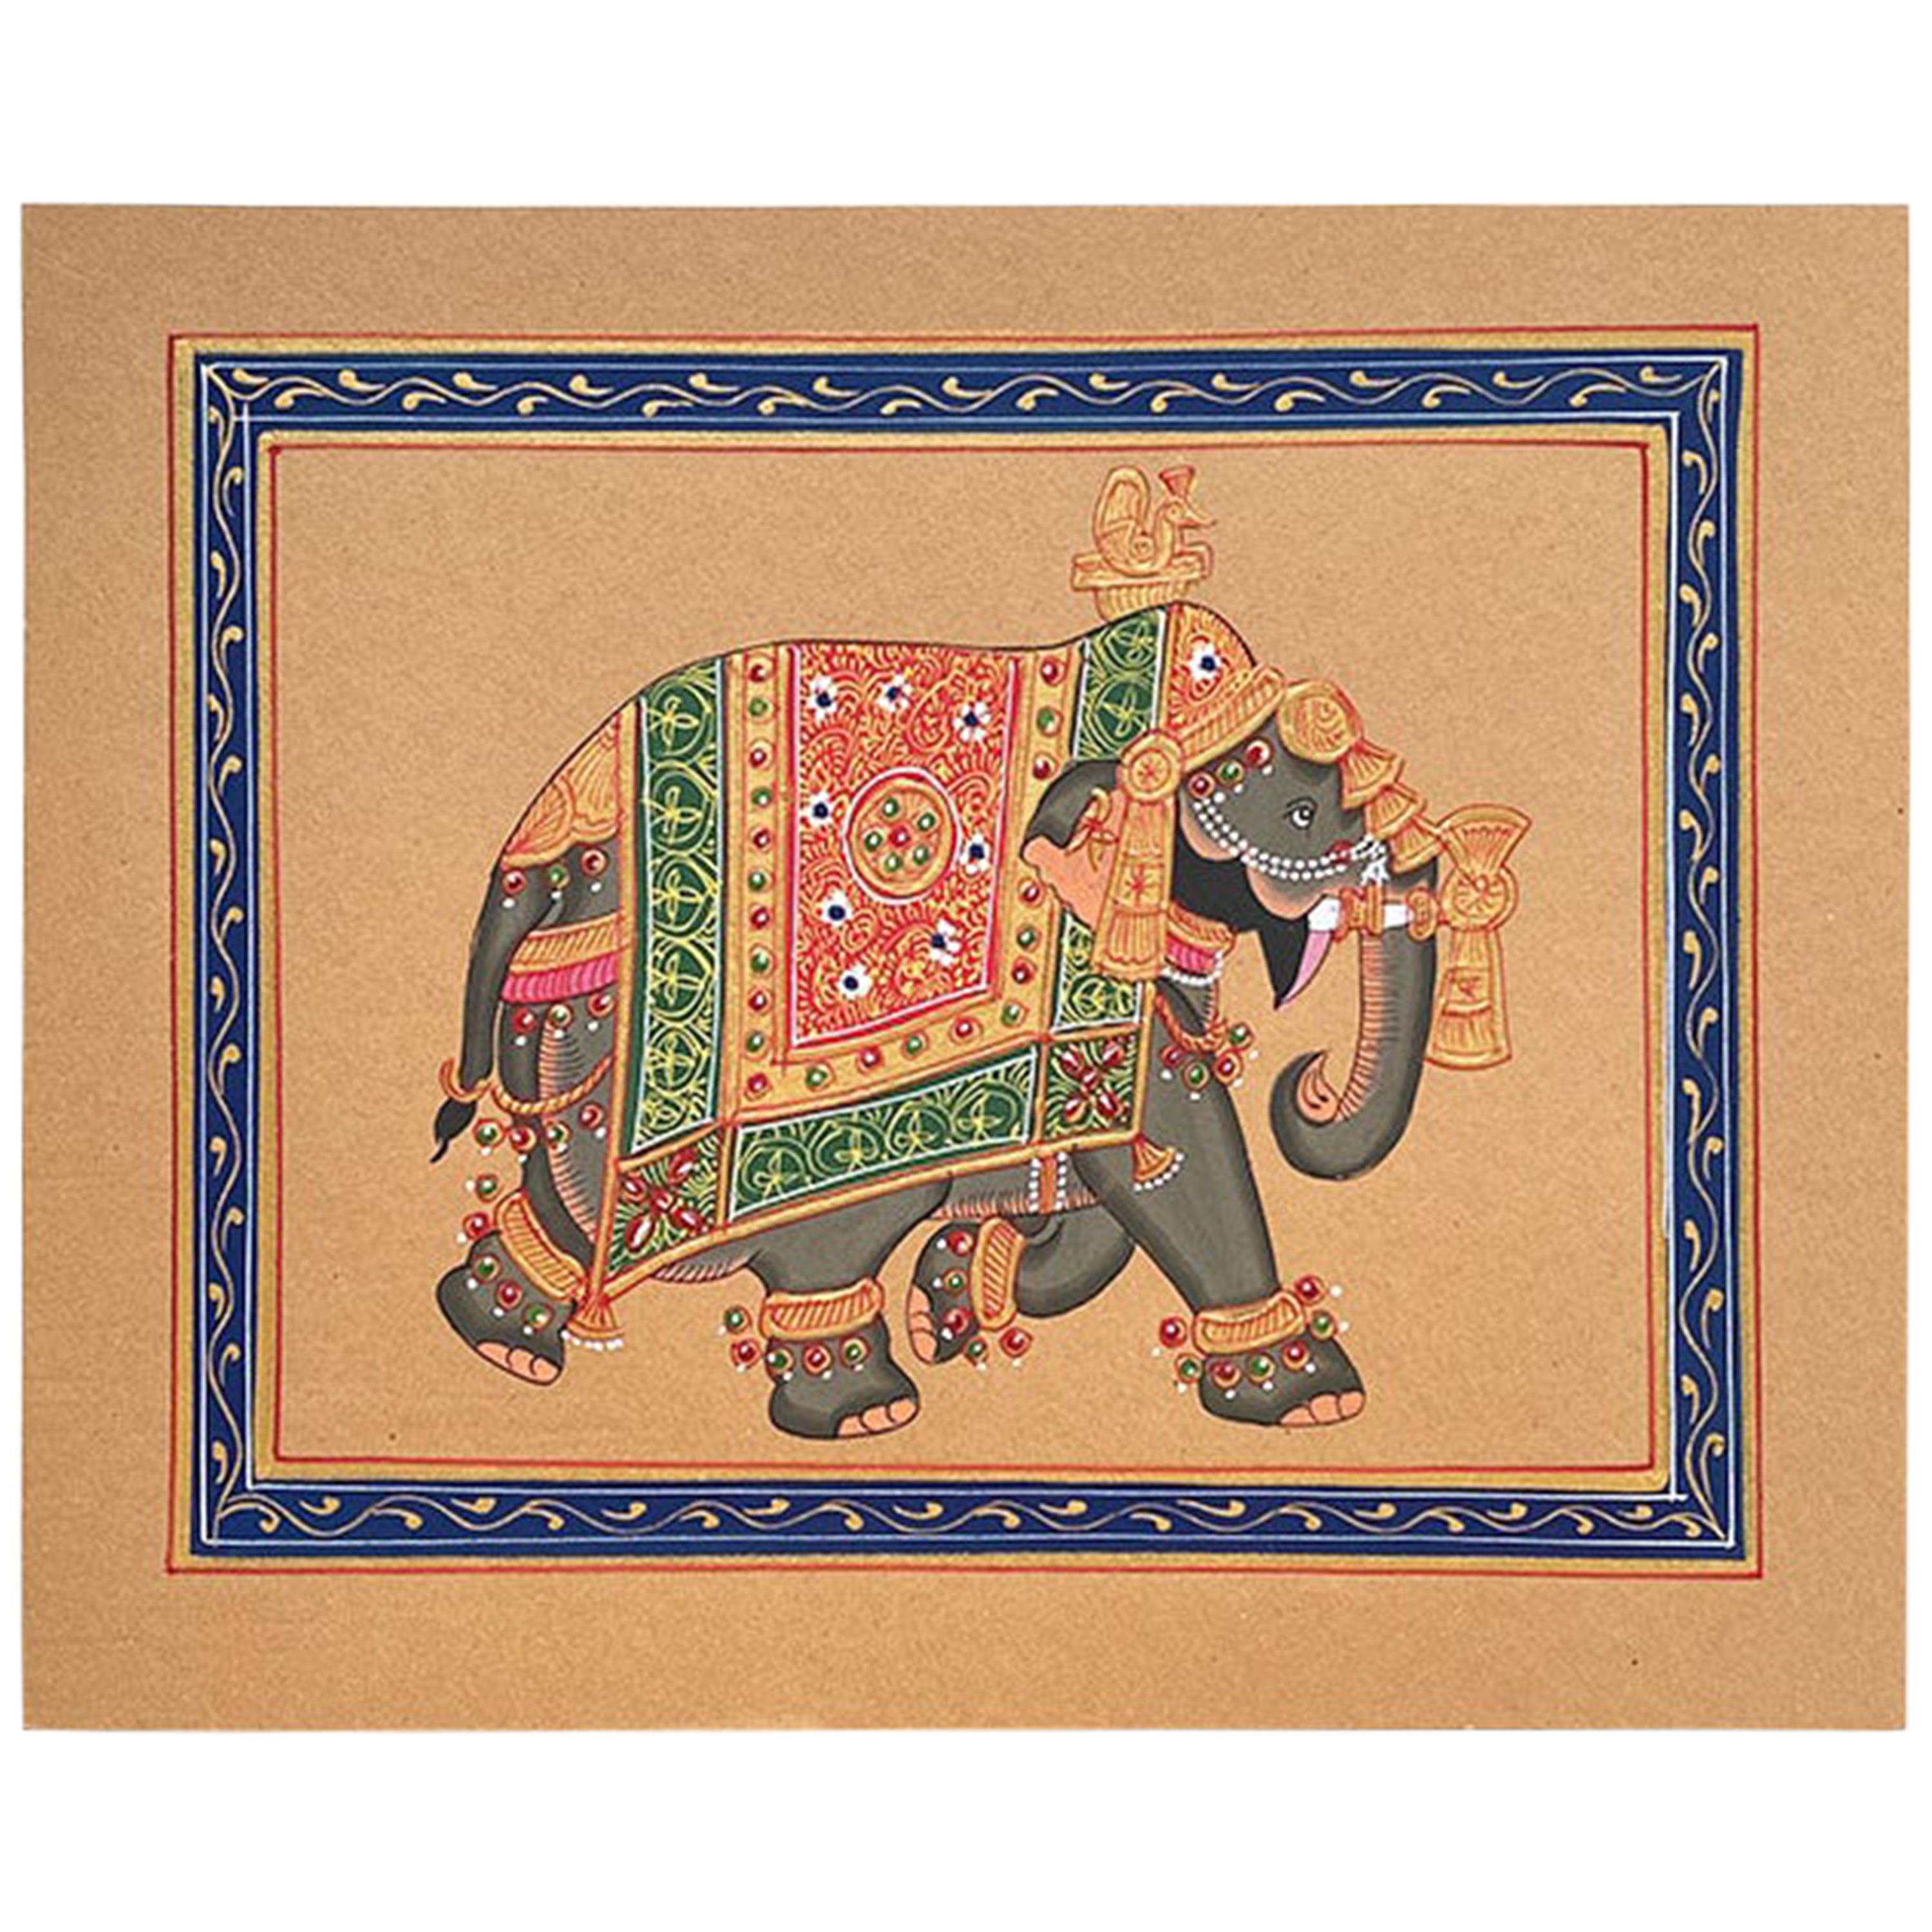 Hand Painted Elephant in Gold Regalia on Paper, India